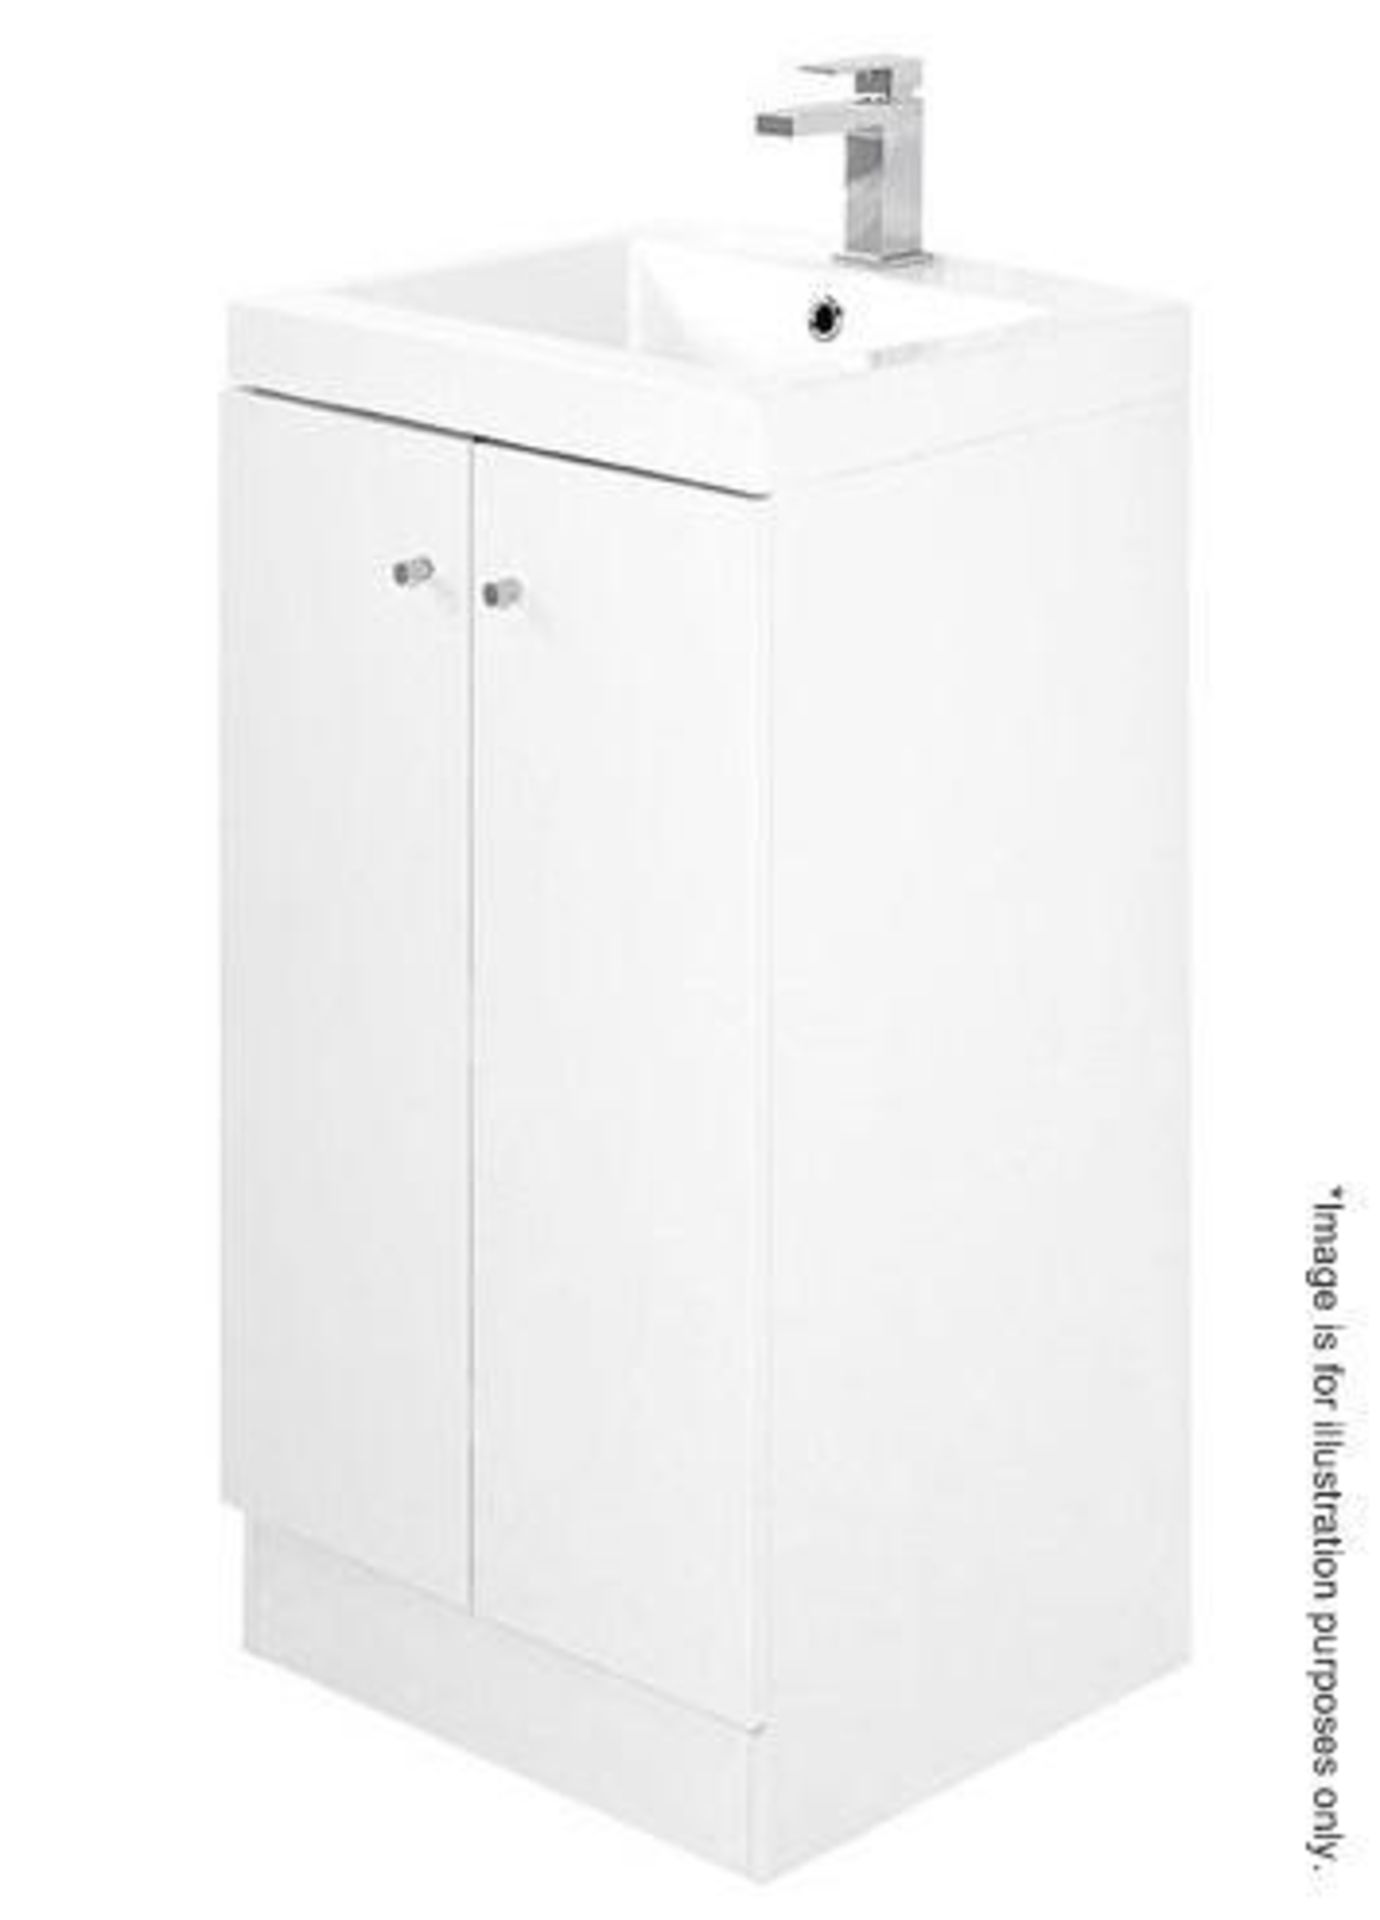 5 x Alpine Duo 400 Floorstanding Vanity Units In Gloss White - Brand New Boxed Stock - Dimensions: H - Image 2 of 3